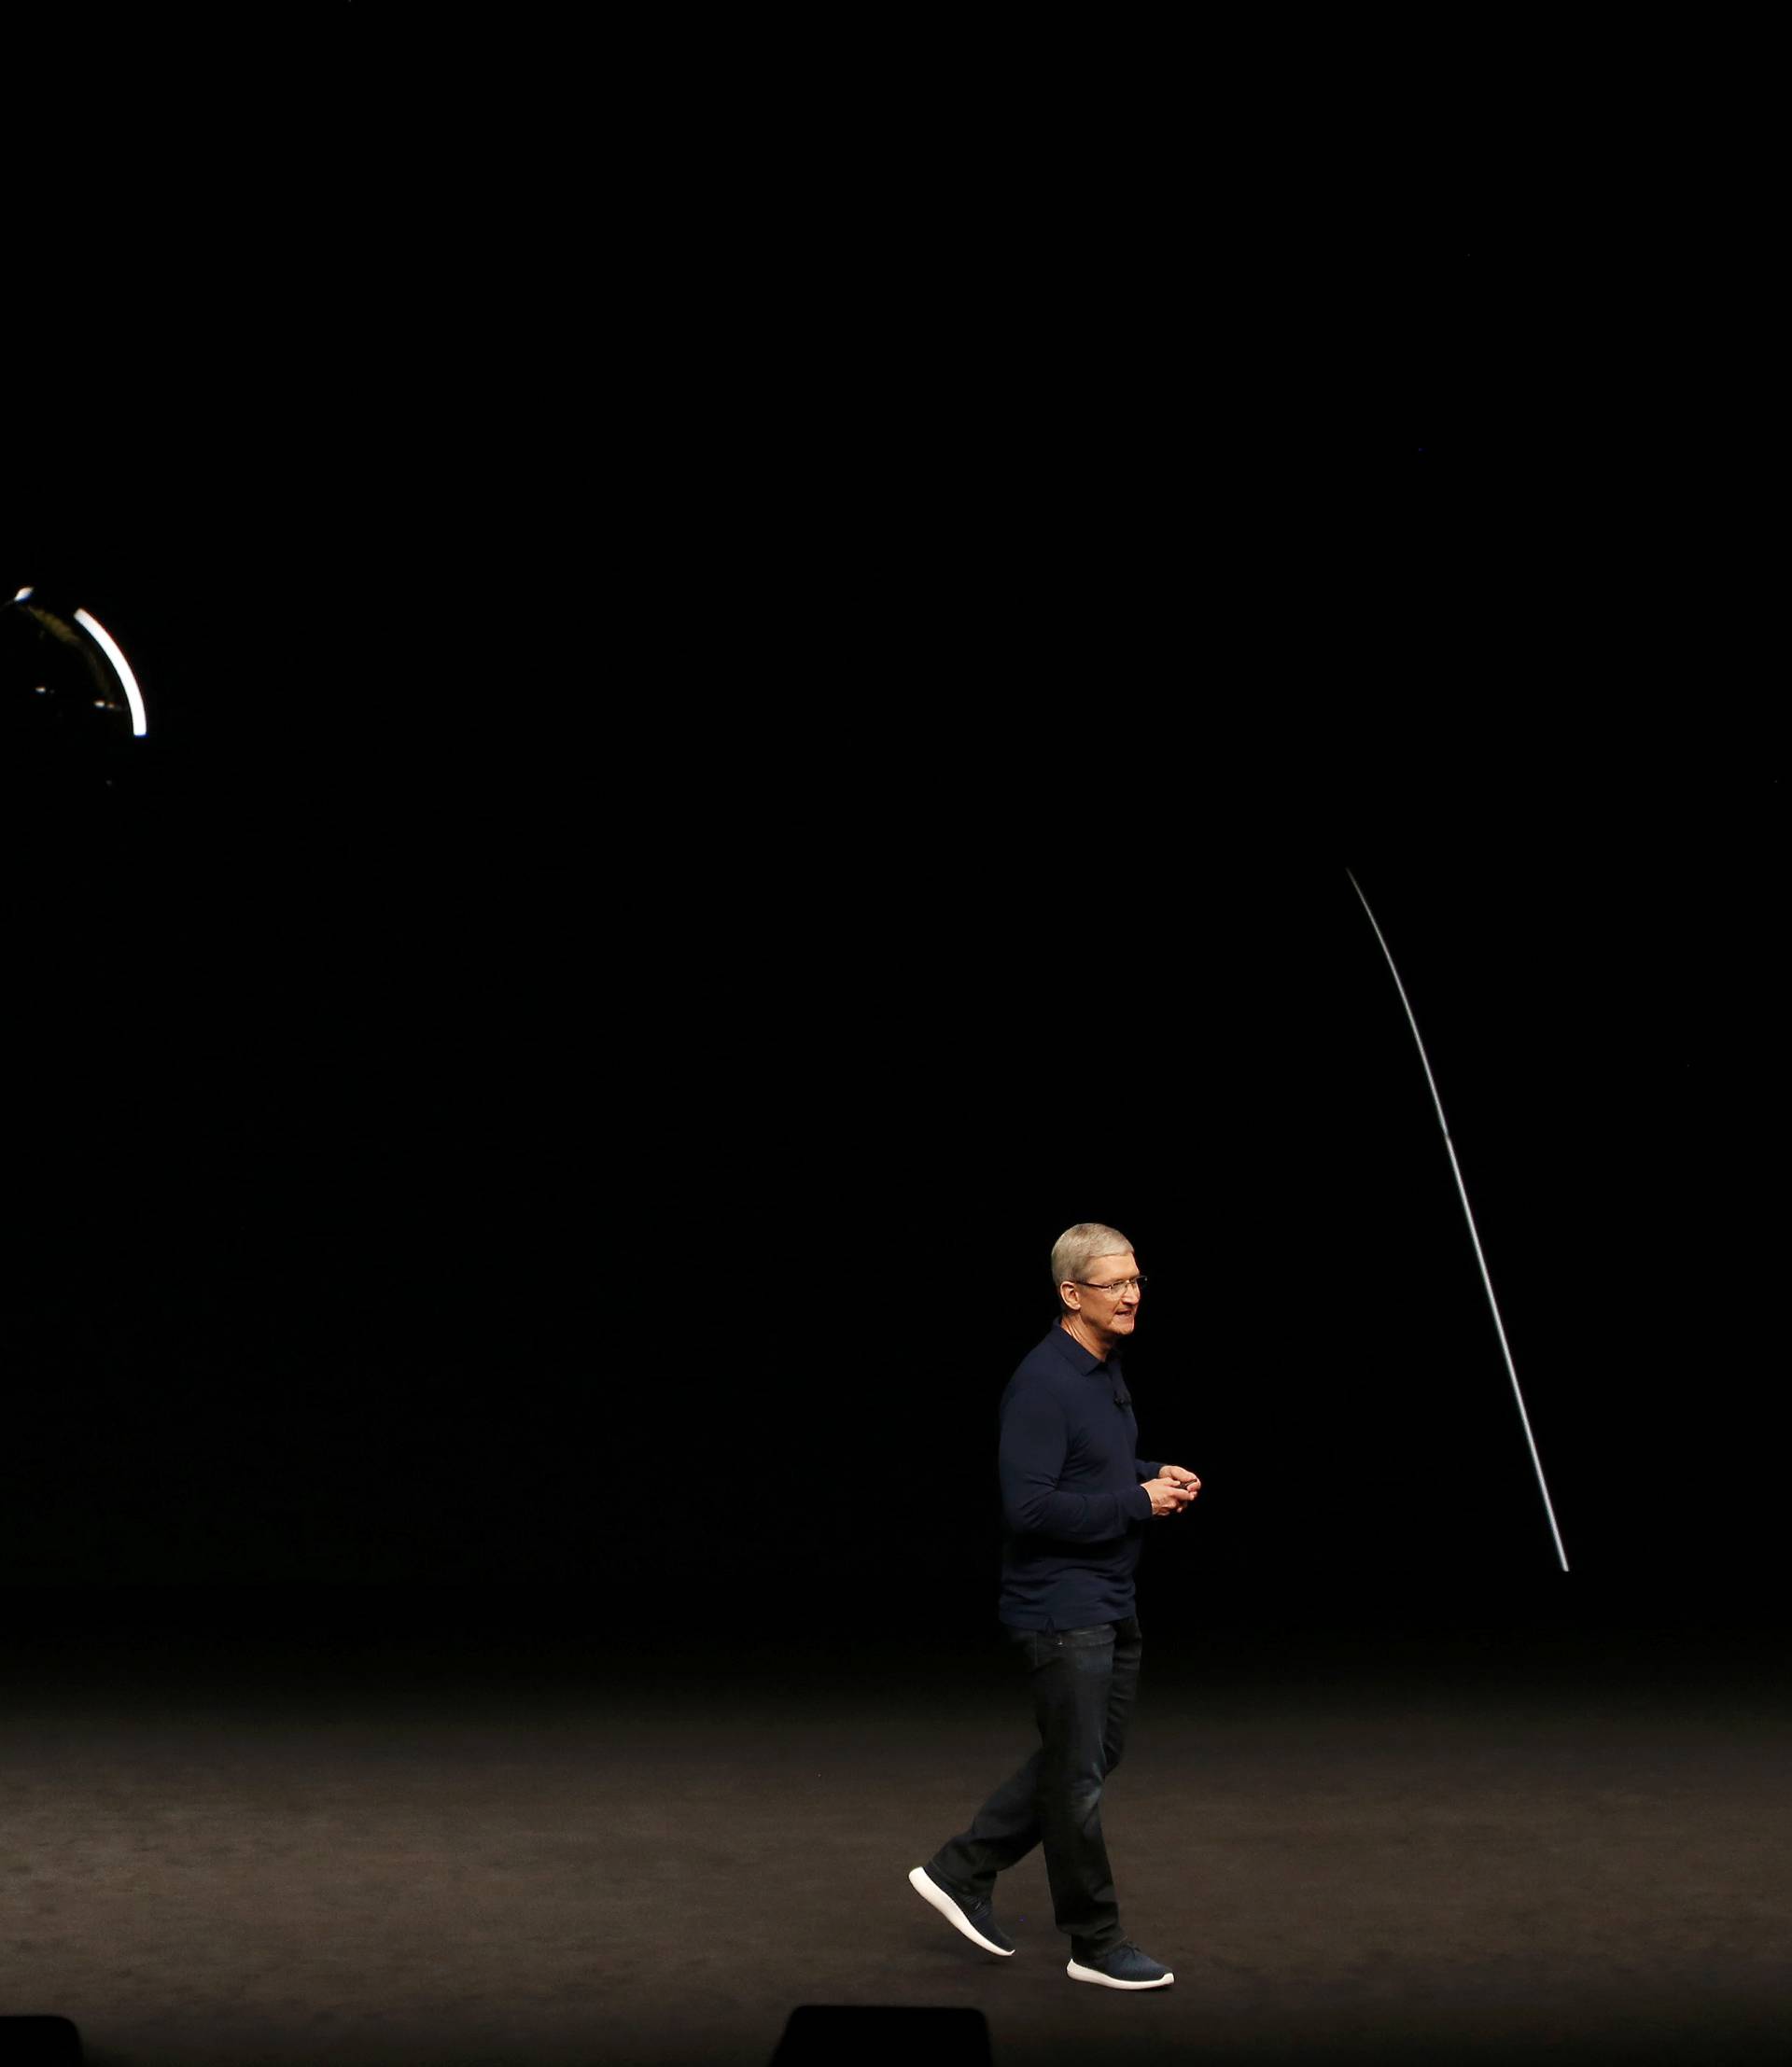 Tim Cook discusses the iPhone 7 during an Apple media event in San Francisco